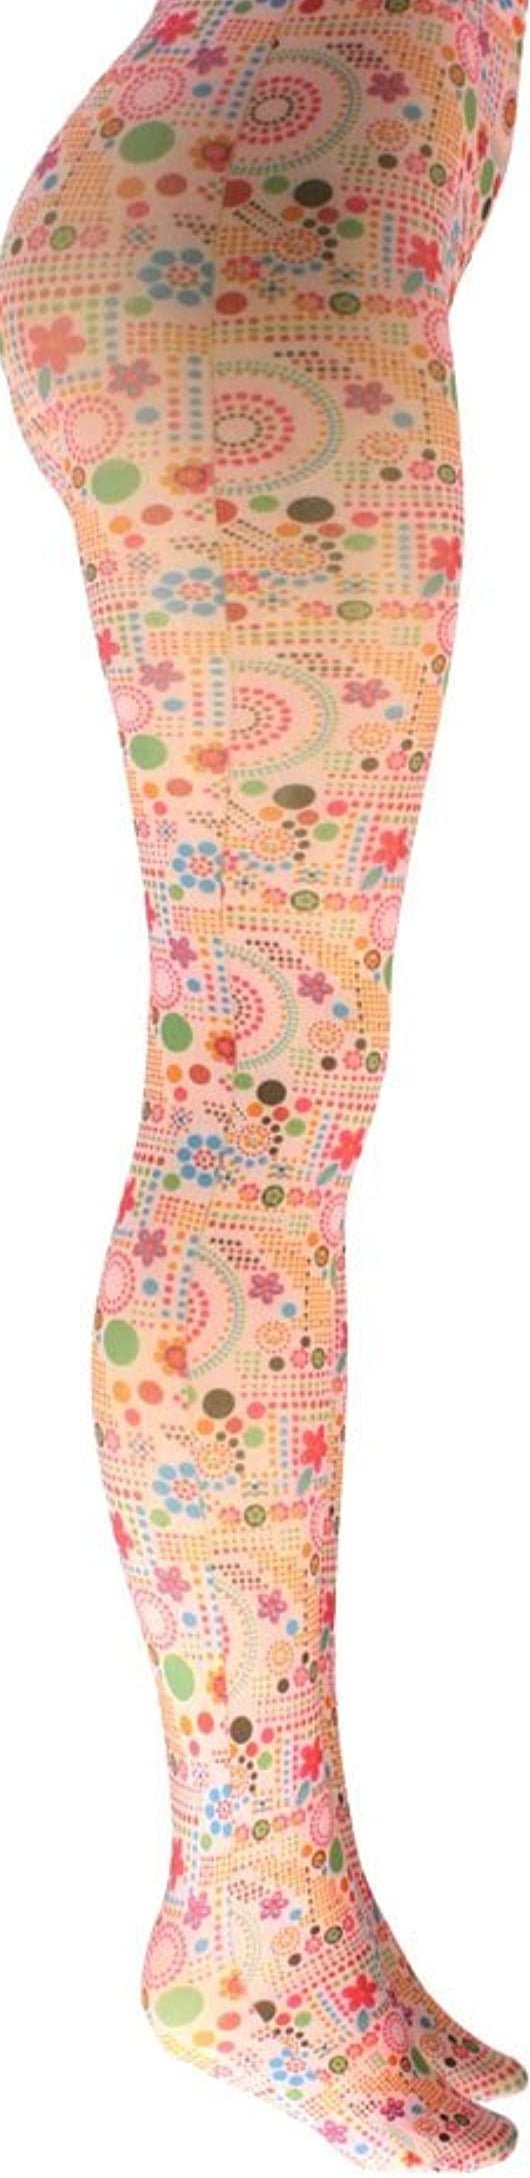 Candy Floral Fashion Tights - iBESTEST.com